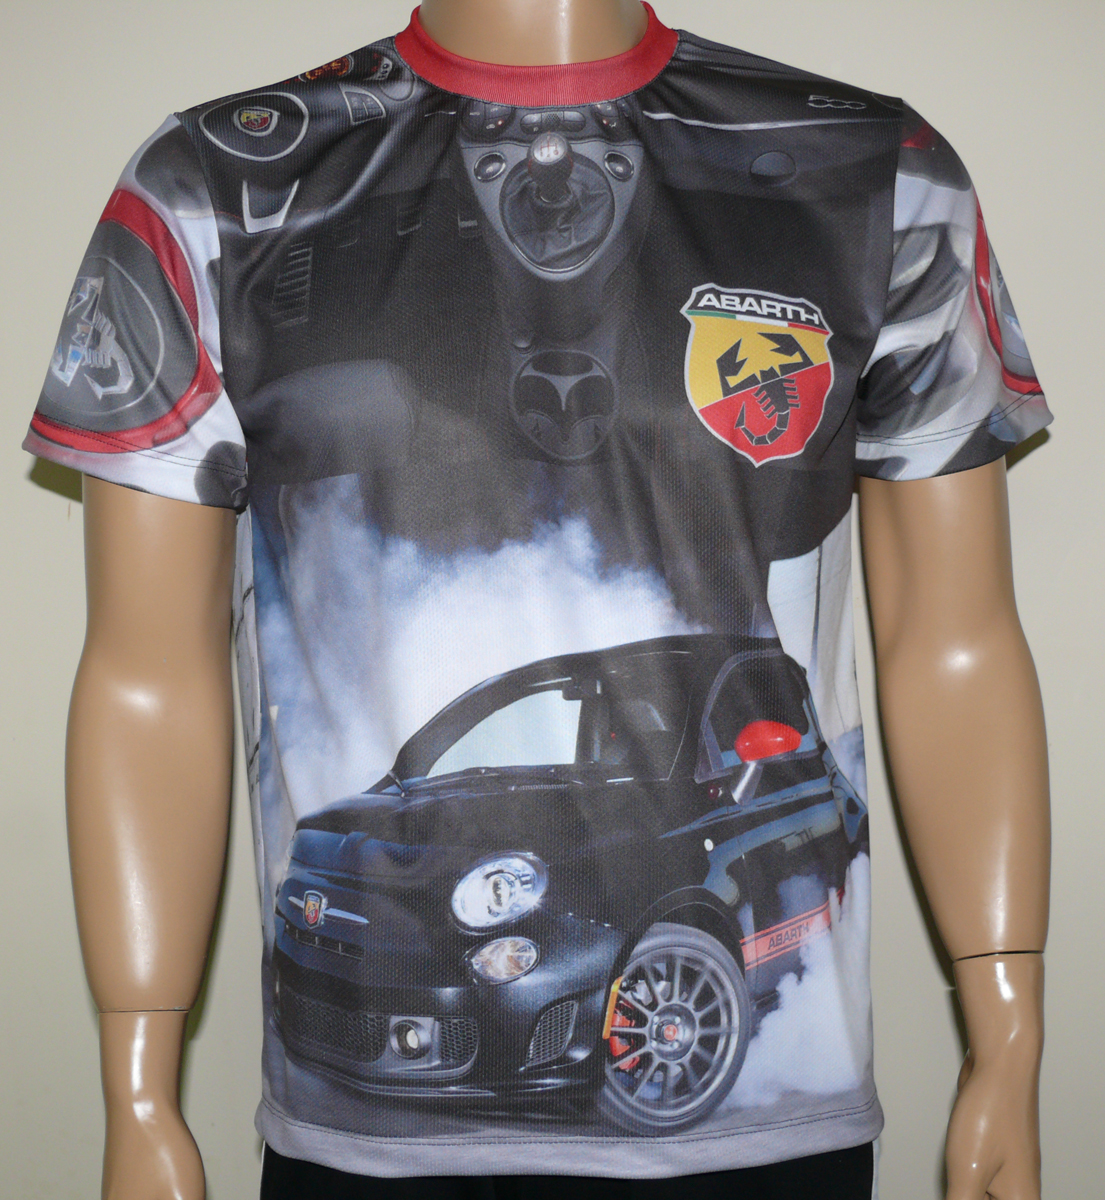 Fiat Abarth t-shirt with logo and all 